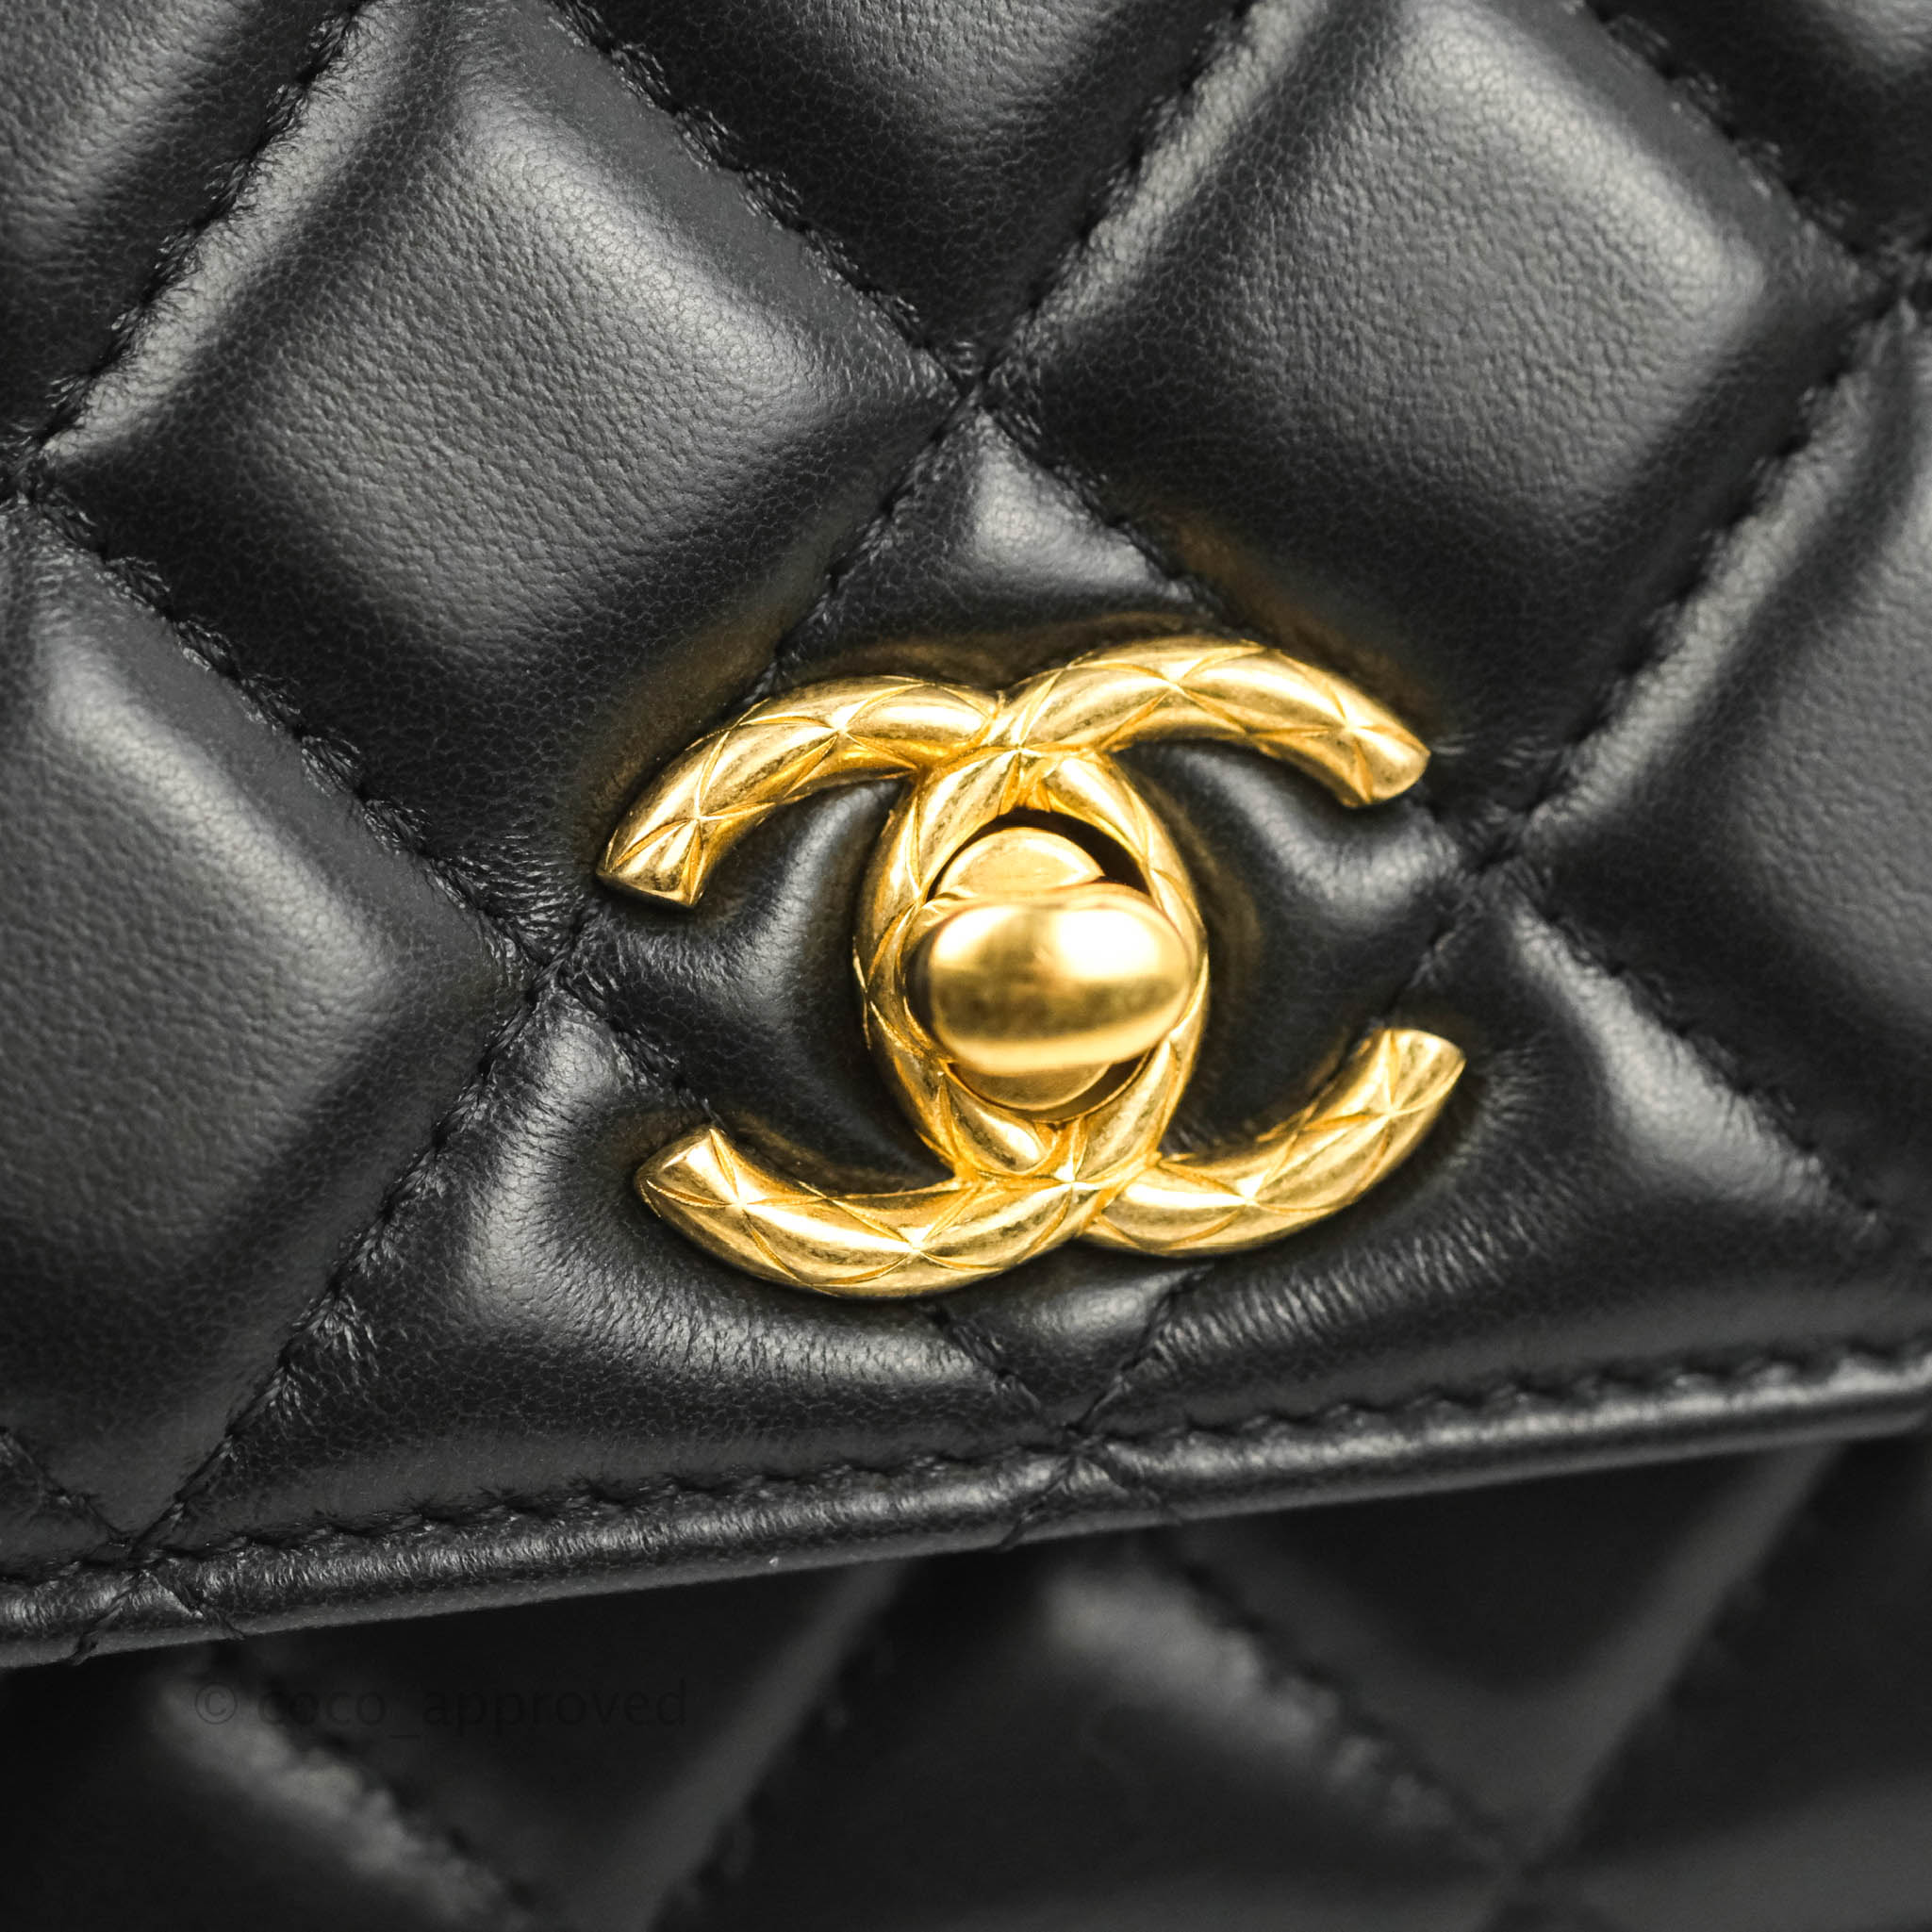 Chanel Quilted Wallet on Chain WOC Adjustable Chain Black Lambskin Age – Coco  Approved Studio